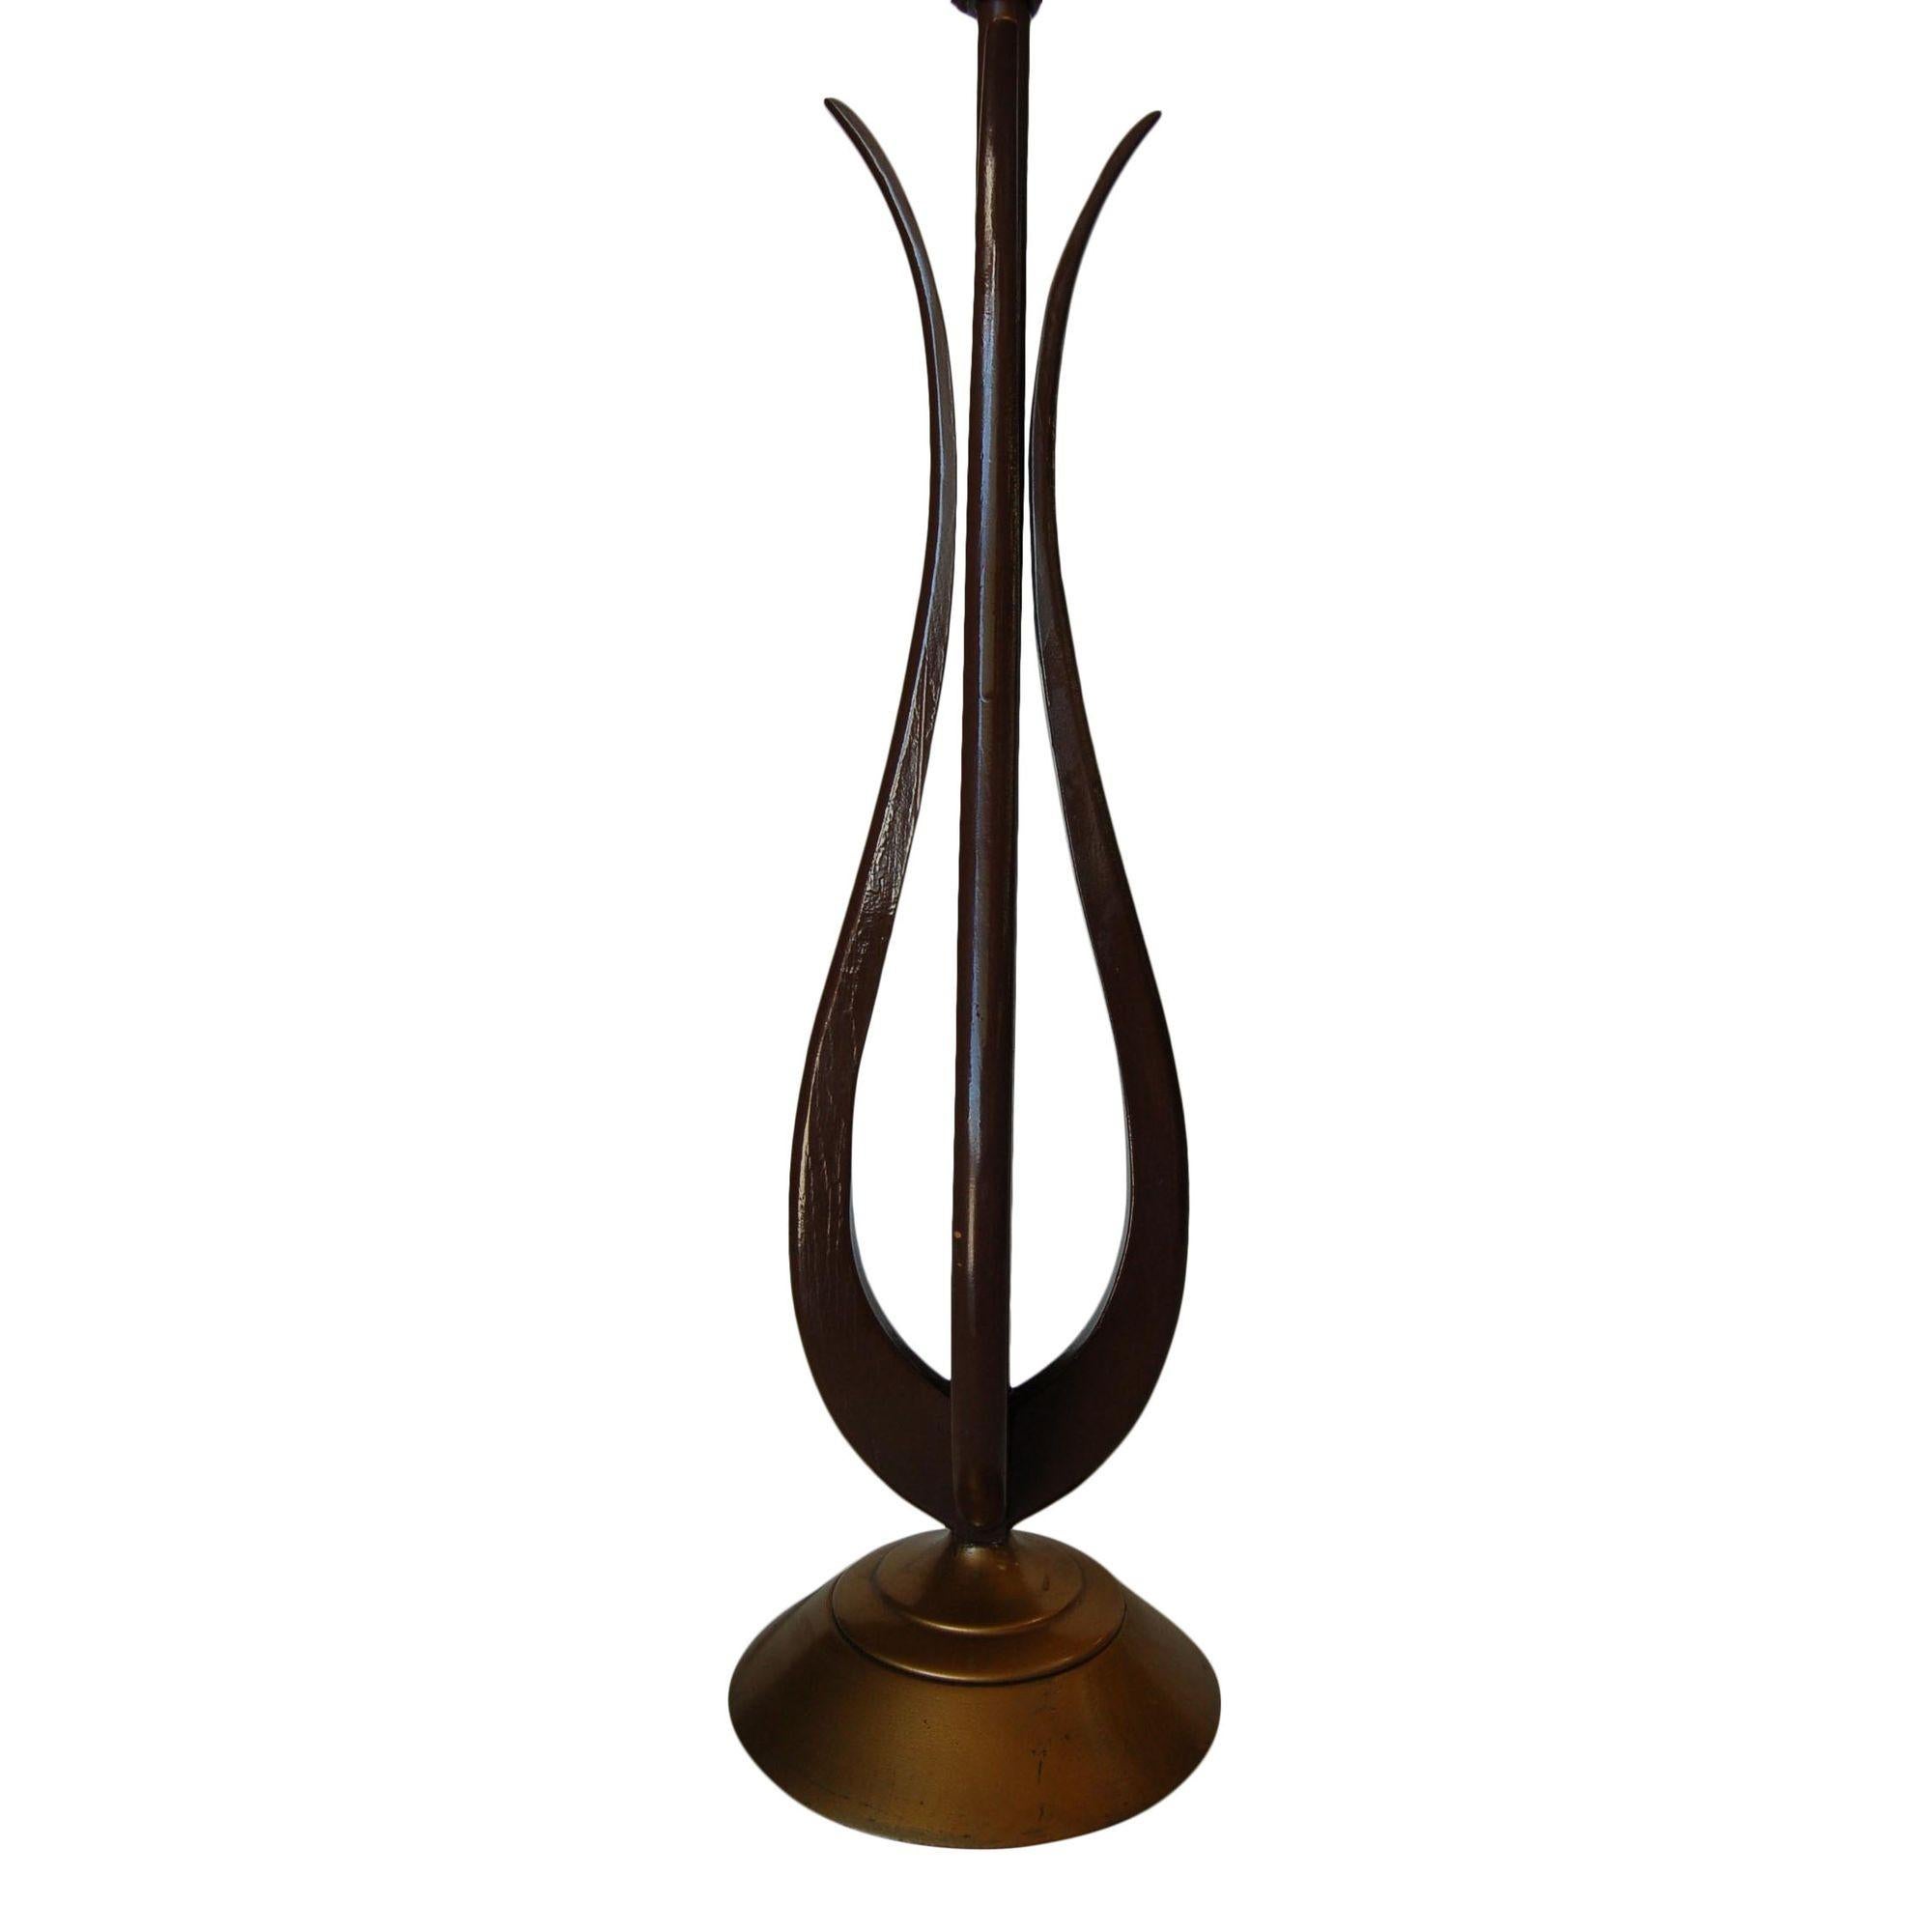 Mid-Century Modern Modernist Harp Shaped Sculptural Walnut and Brass Tone Table Lamp, Pair For Sale